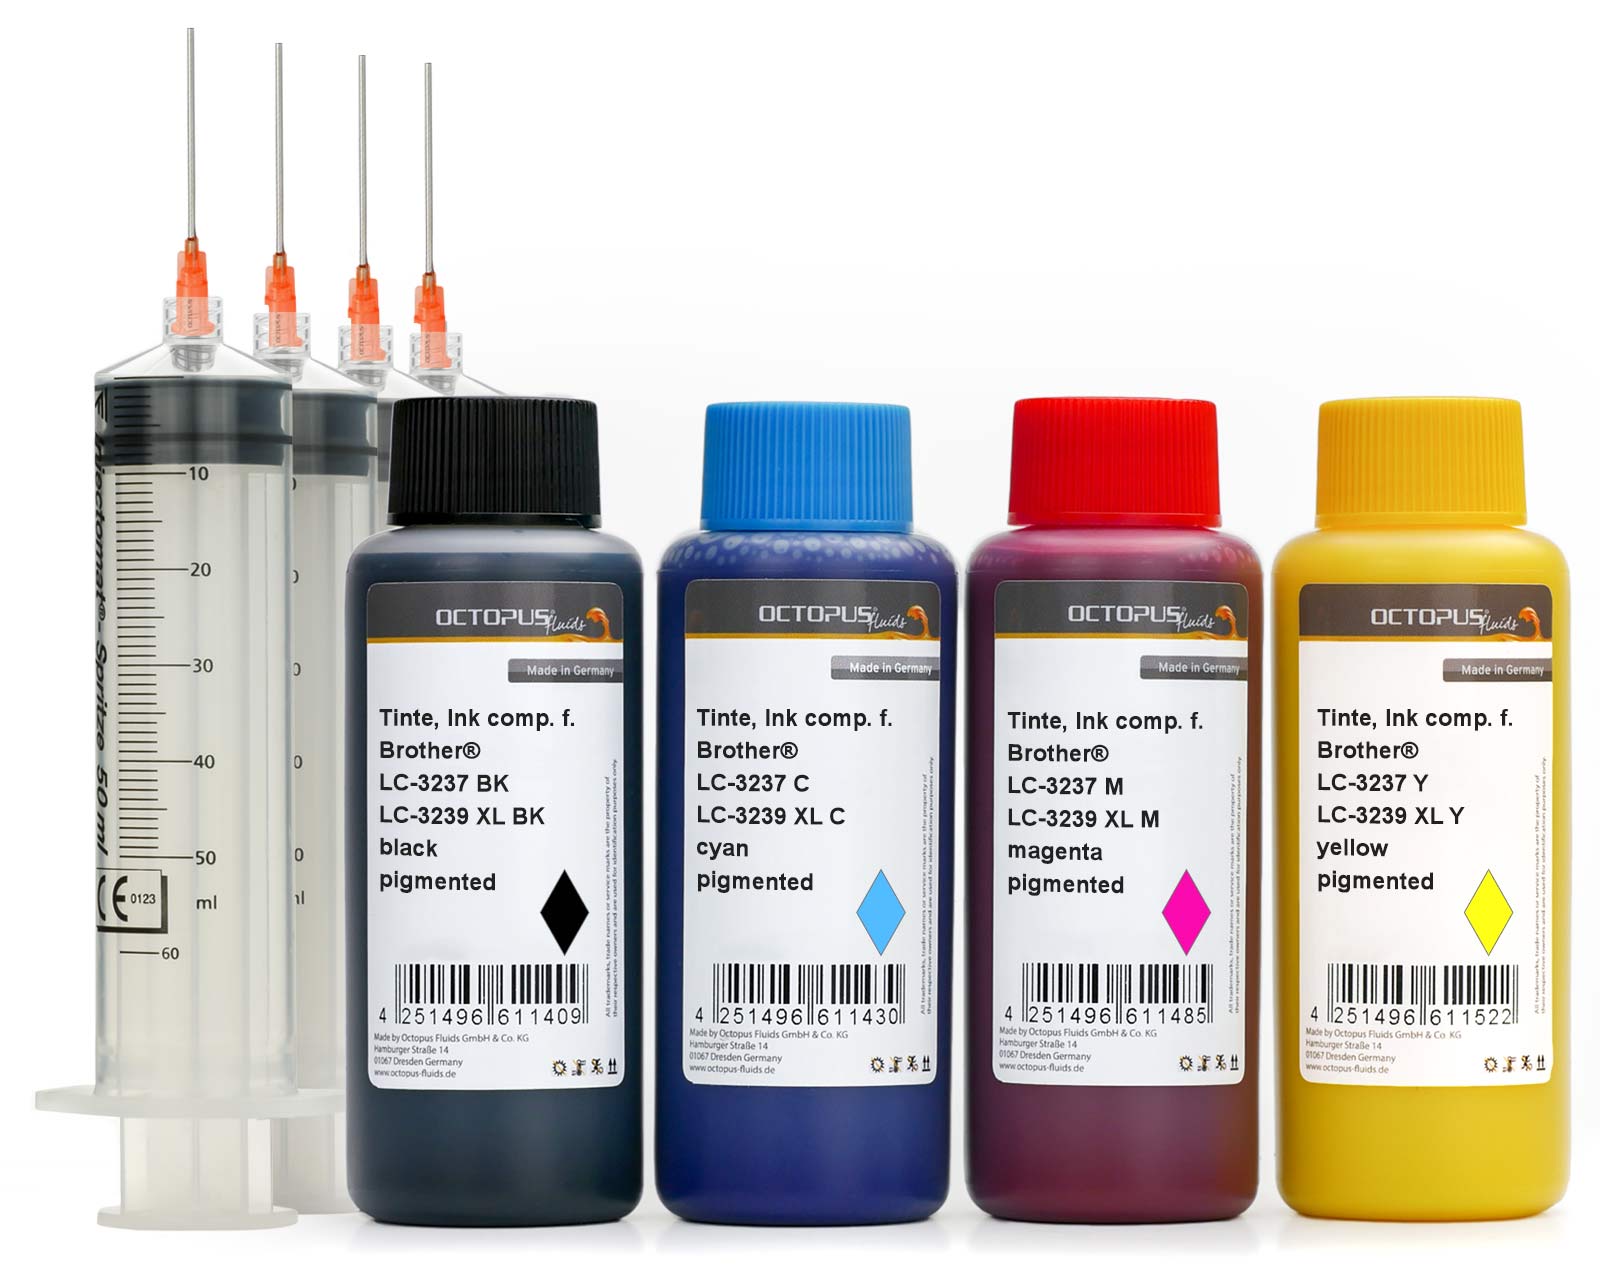 Refill ink comp. with Brother LC-3237, LC-3239 XL, HL-J 6000 DW, HL-J 6100 DW, MFC-J 5945 DW, MFC-J 6945 DW, MFC-J 6947 DW